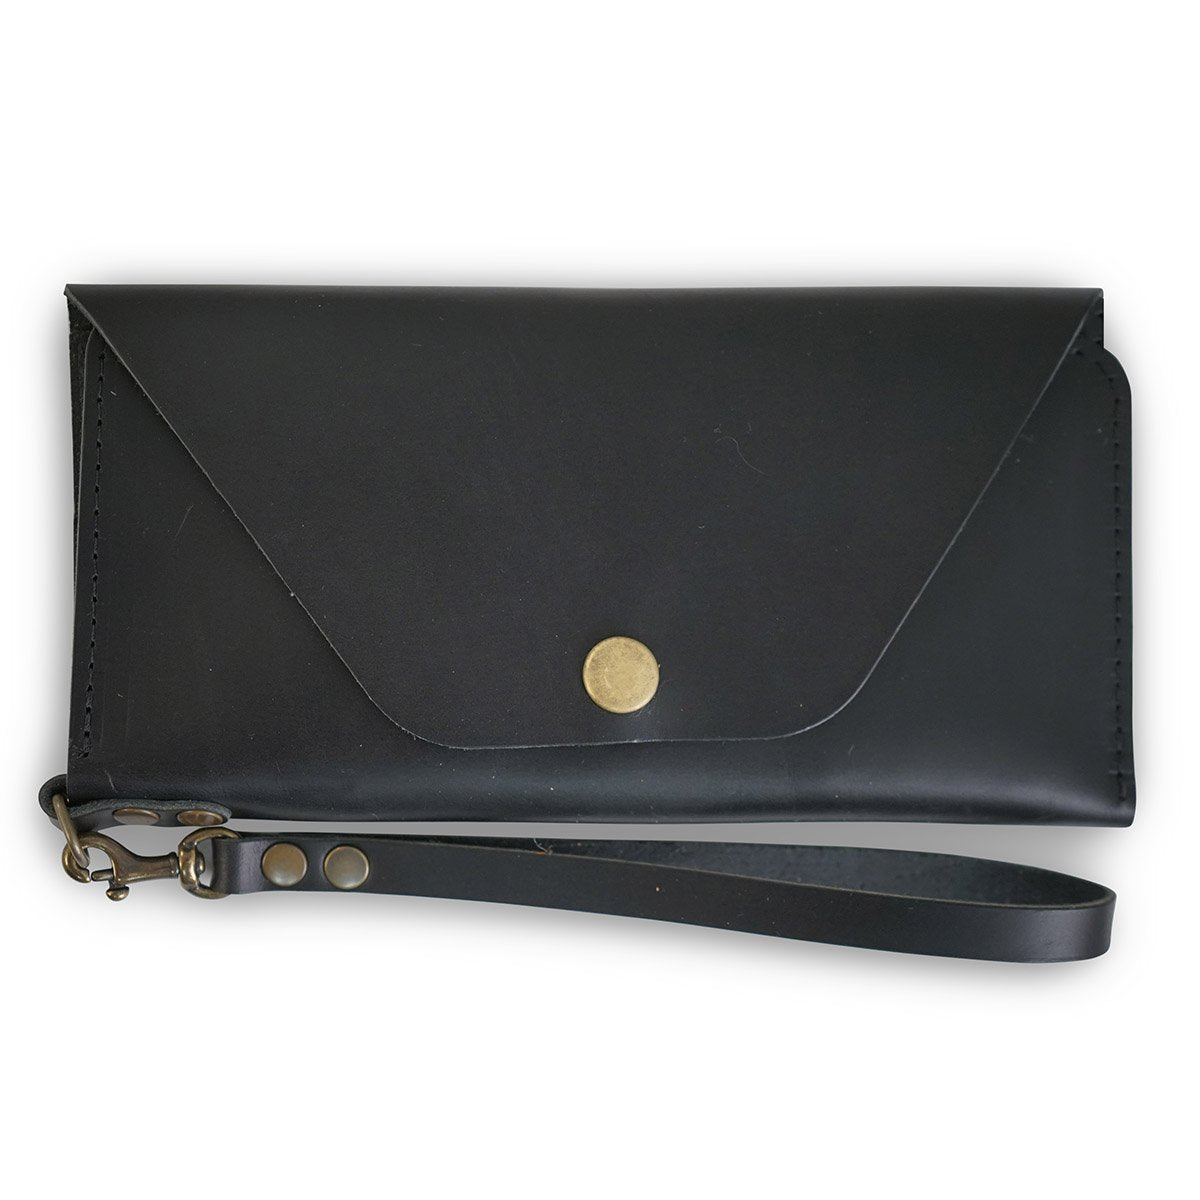 Envelope Womens Black Leather Billfold Wallet Small Wallet with Coin P